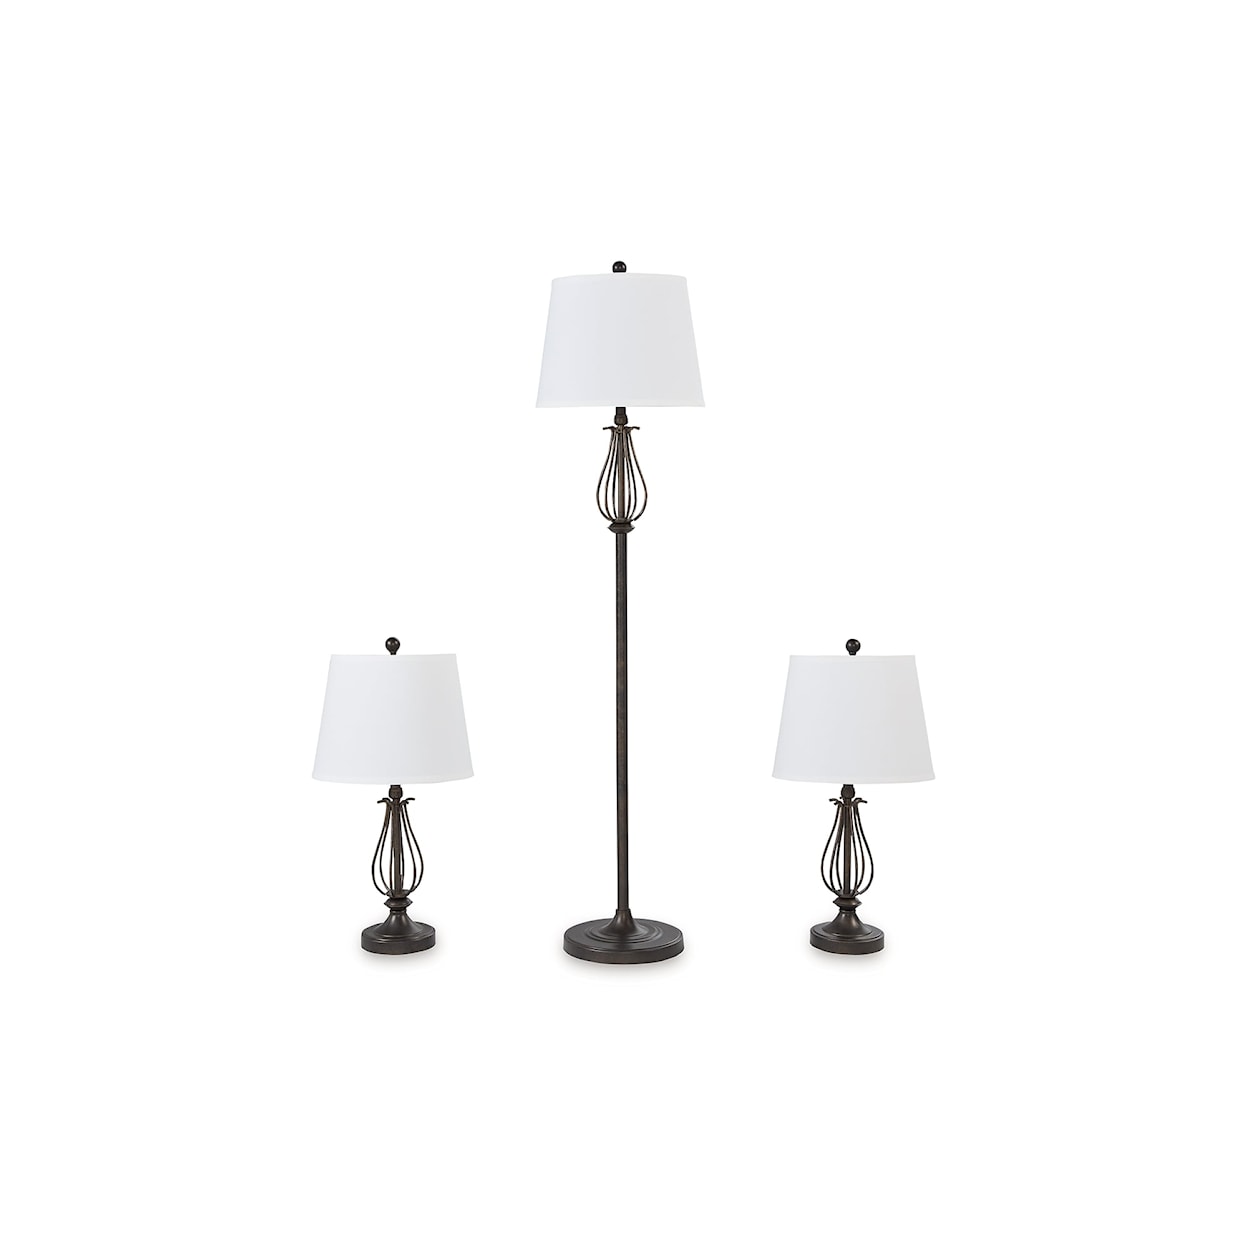 Signature Design by Ashley Brycestone Metal Floor Lamp with 2 Table Lamps